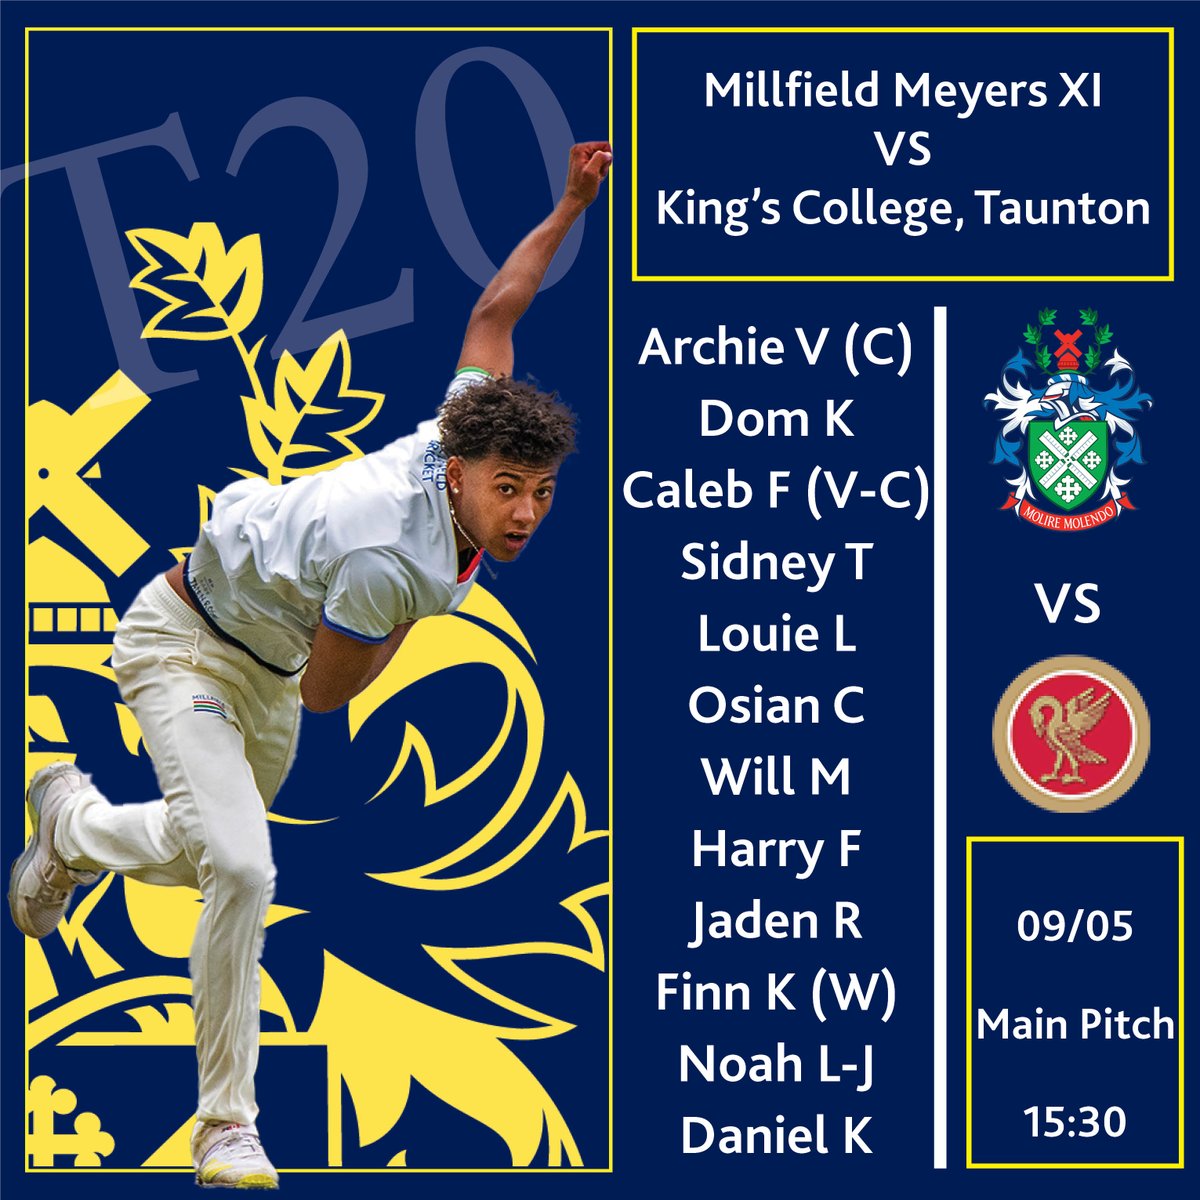 The suns out and cricket is on! ☀️ 🏏 Make sure to support the Meyer’s squad in action this afternoon as they take on King’s College, Taunton in round 1 of HMC T20.